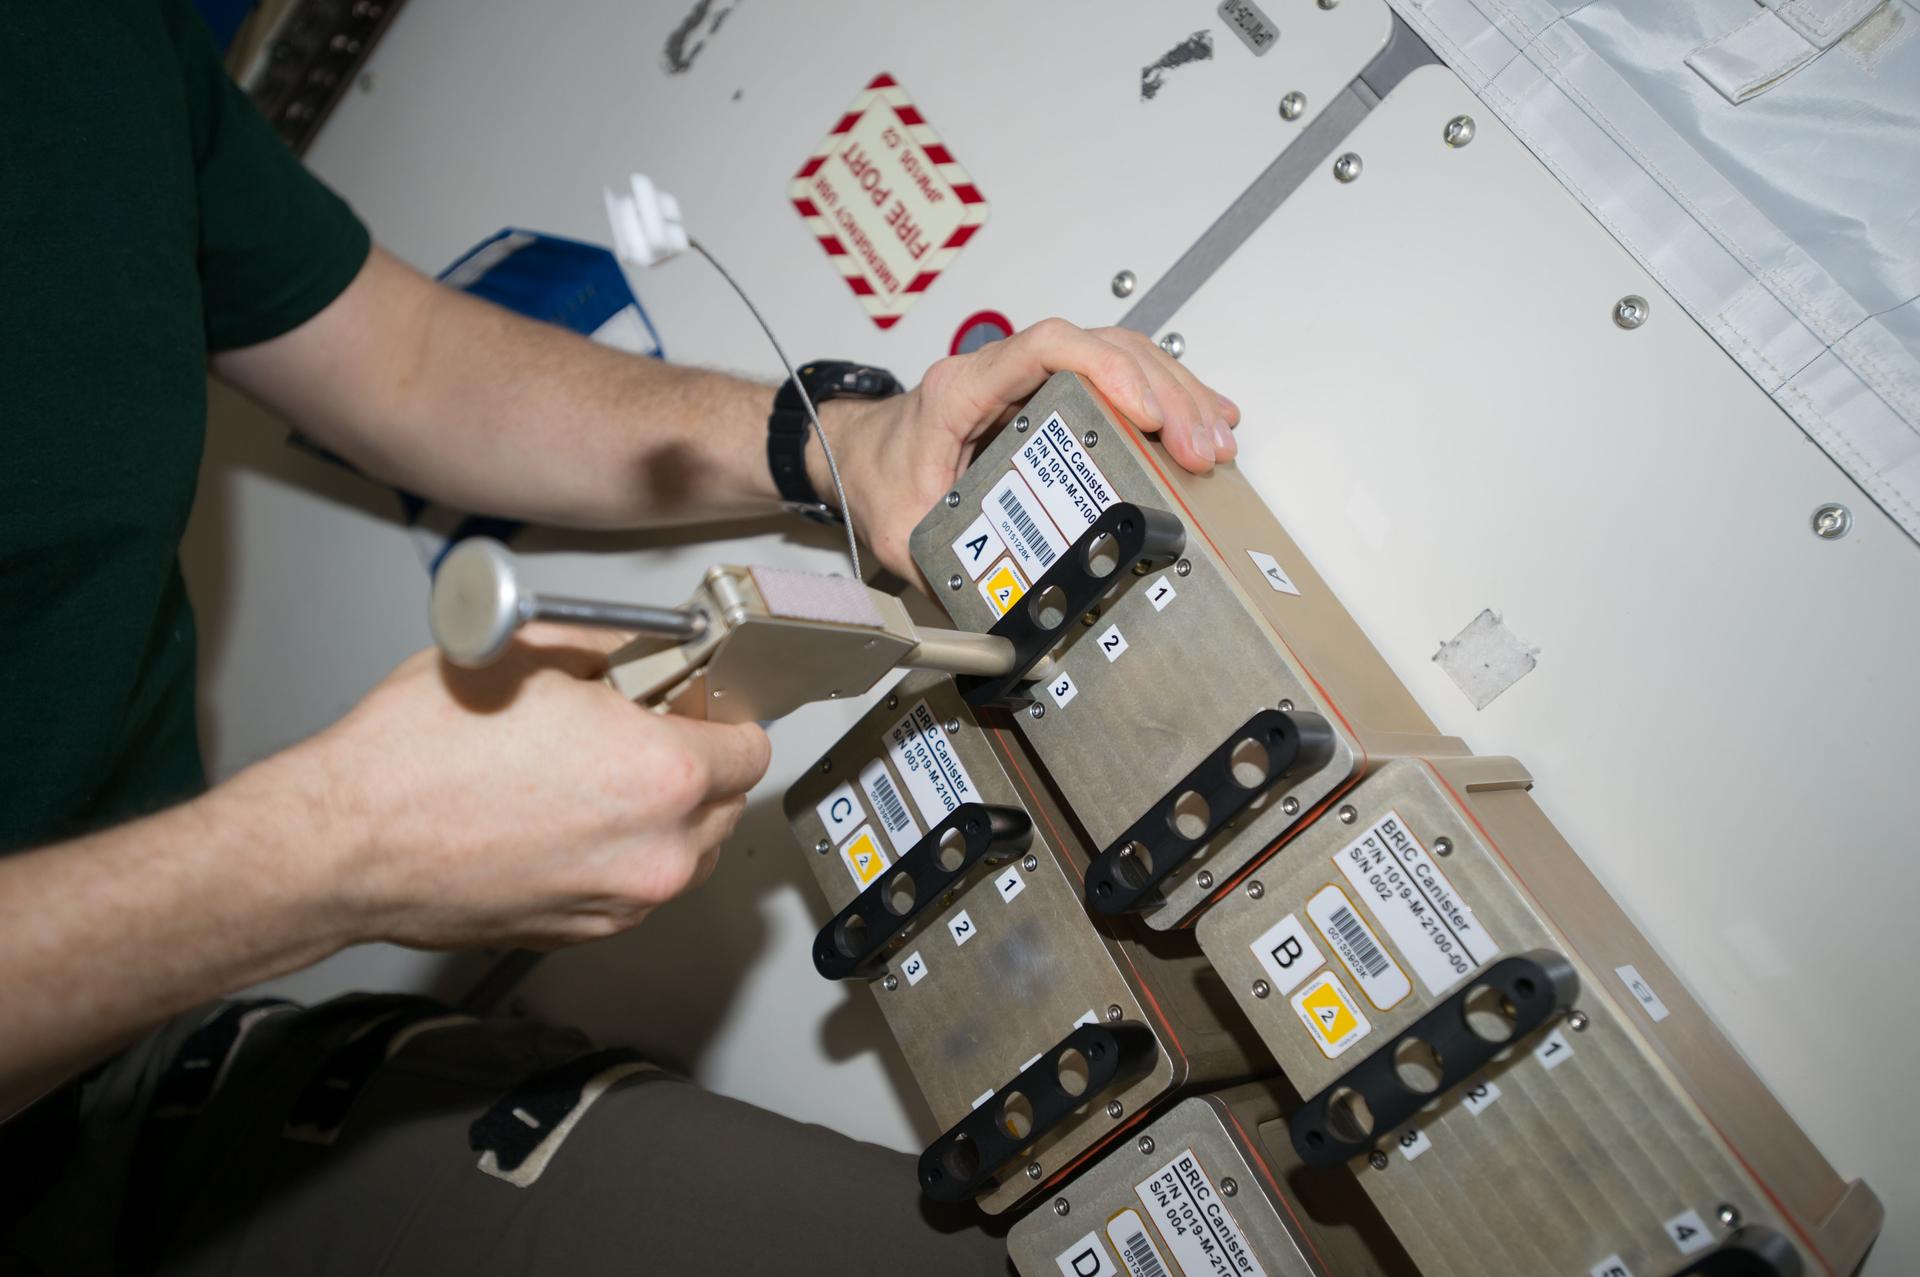 An image of the Biological Research In Canisters (BRIC) hardware the BRIC-24 experiment will utilize aboard the International Space Station.